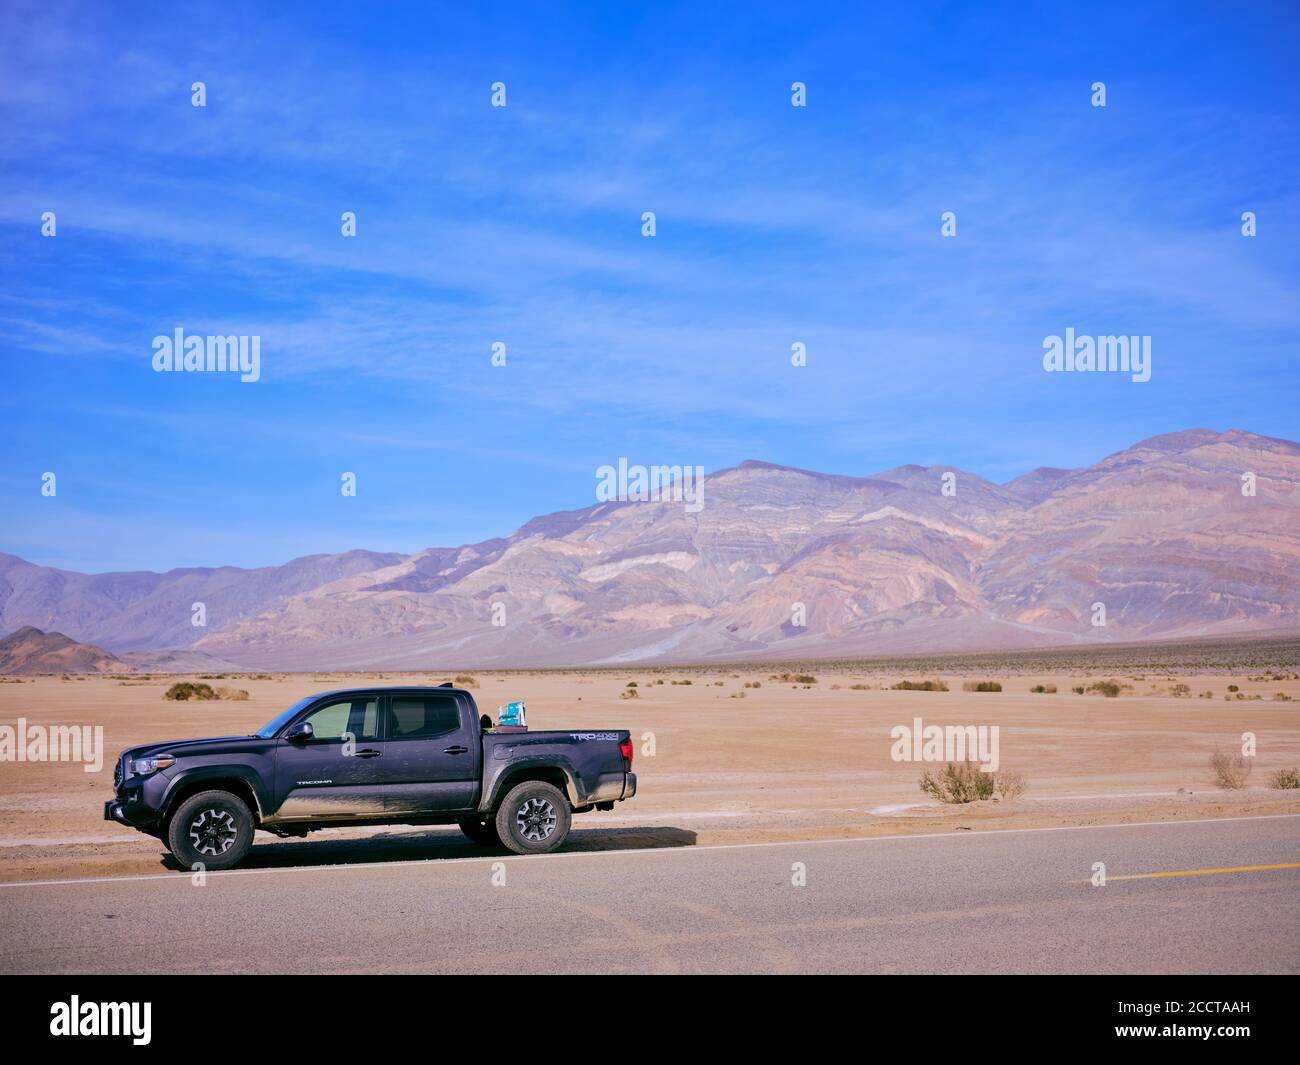 A toyota truck parked on the side of a desert highway, Death Valley Stock Photo